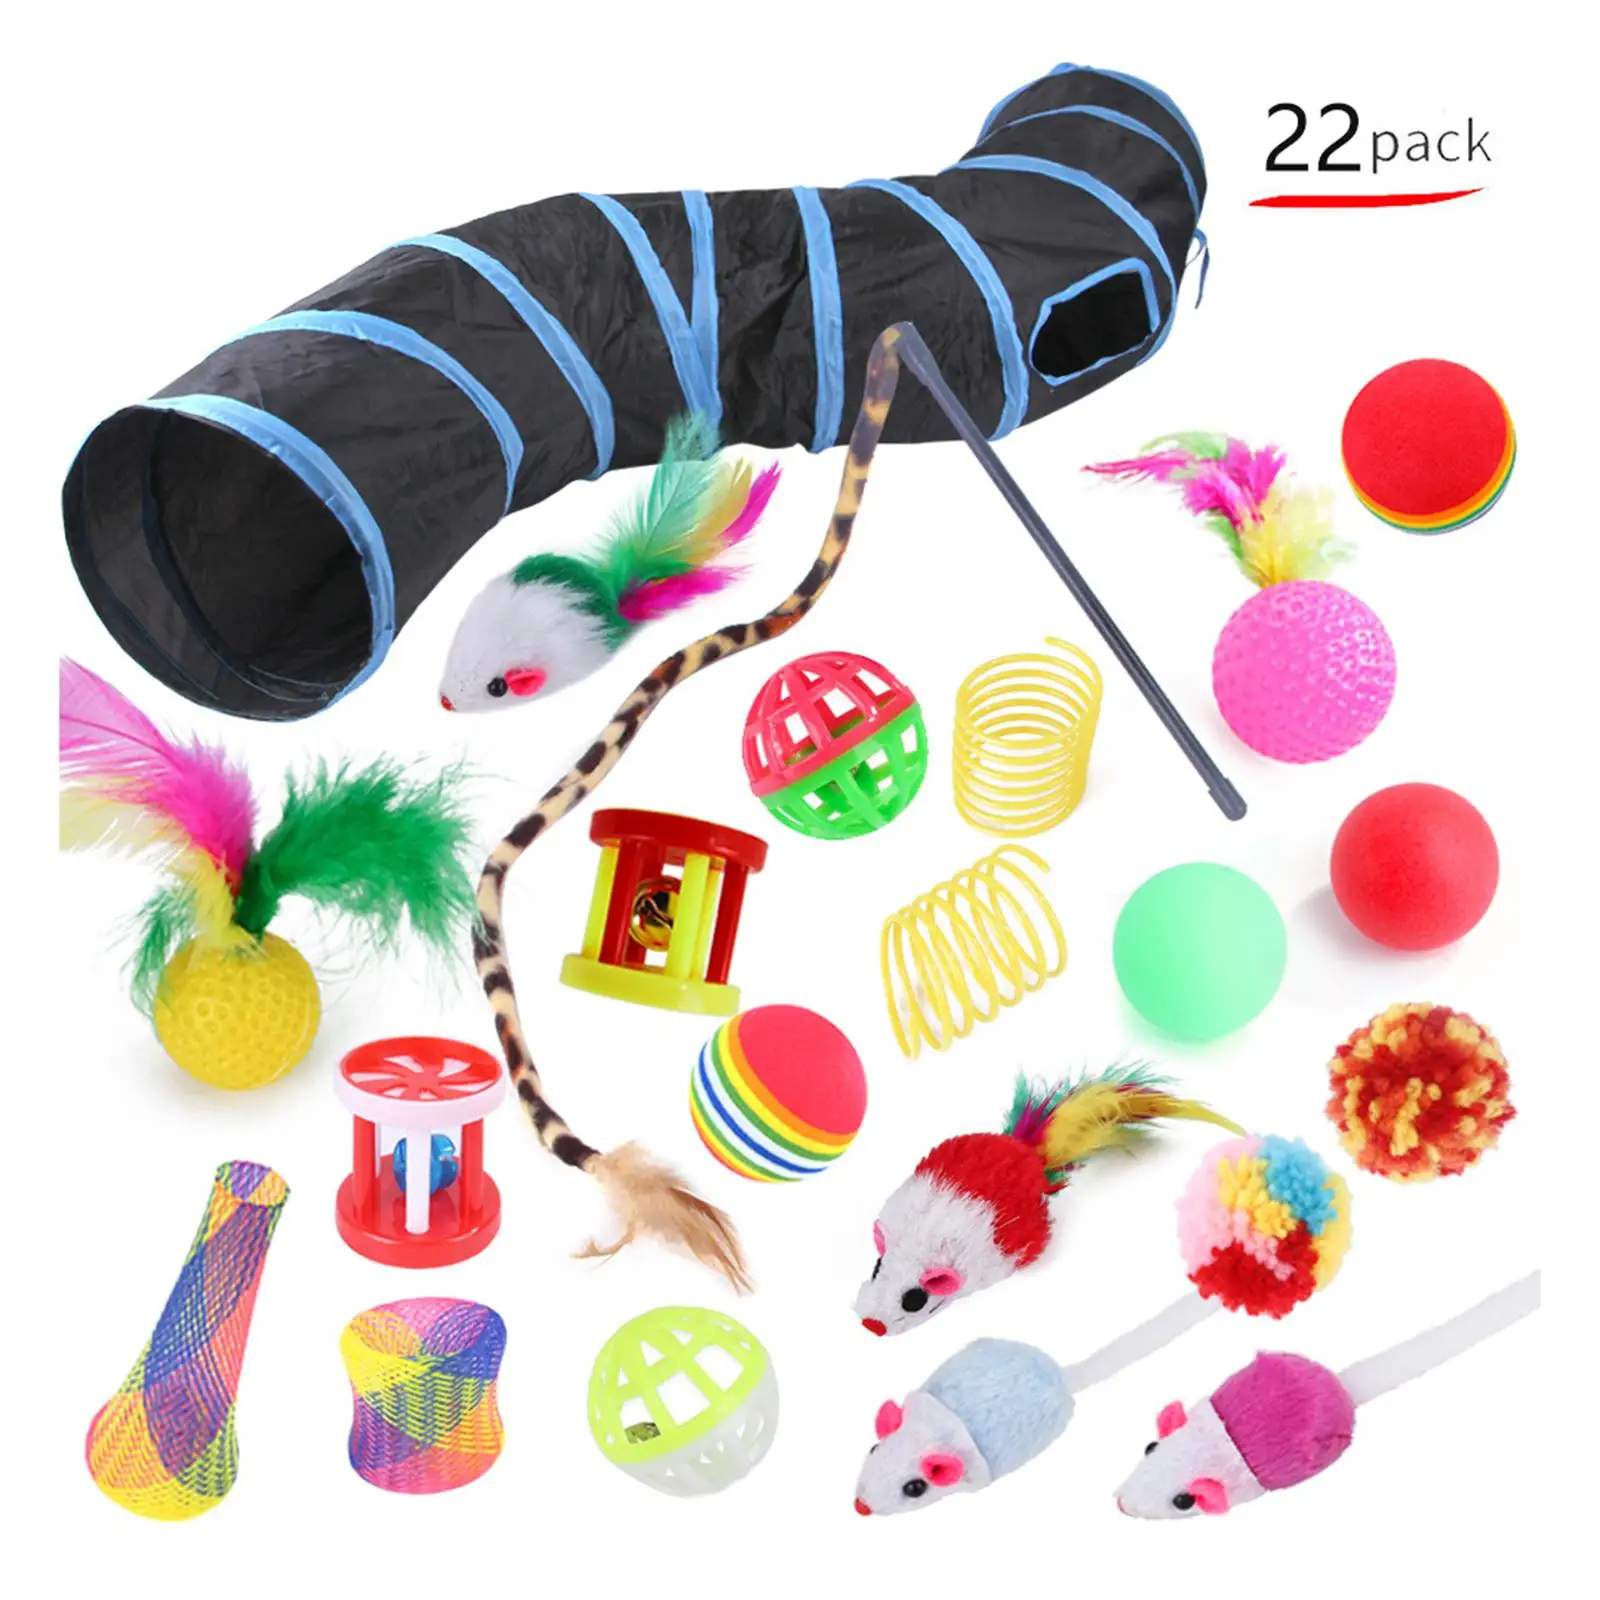 Cat Toy Set, Pet Funny Cat Combination Toy, Dog Tunnel, Cat Channel Pet Cat Toys Interactive Supplies